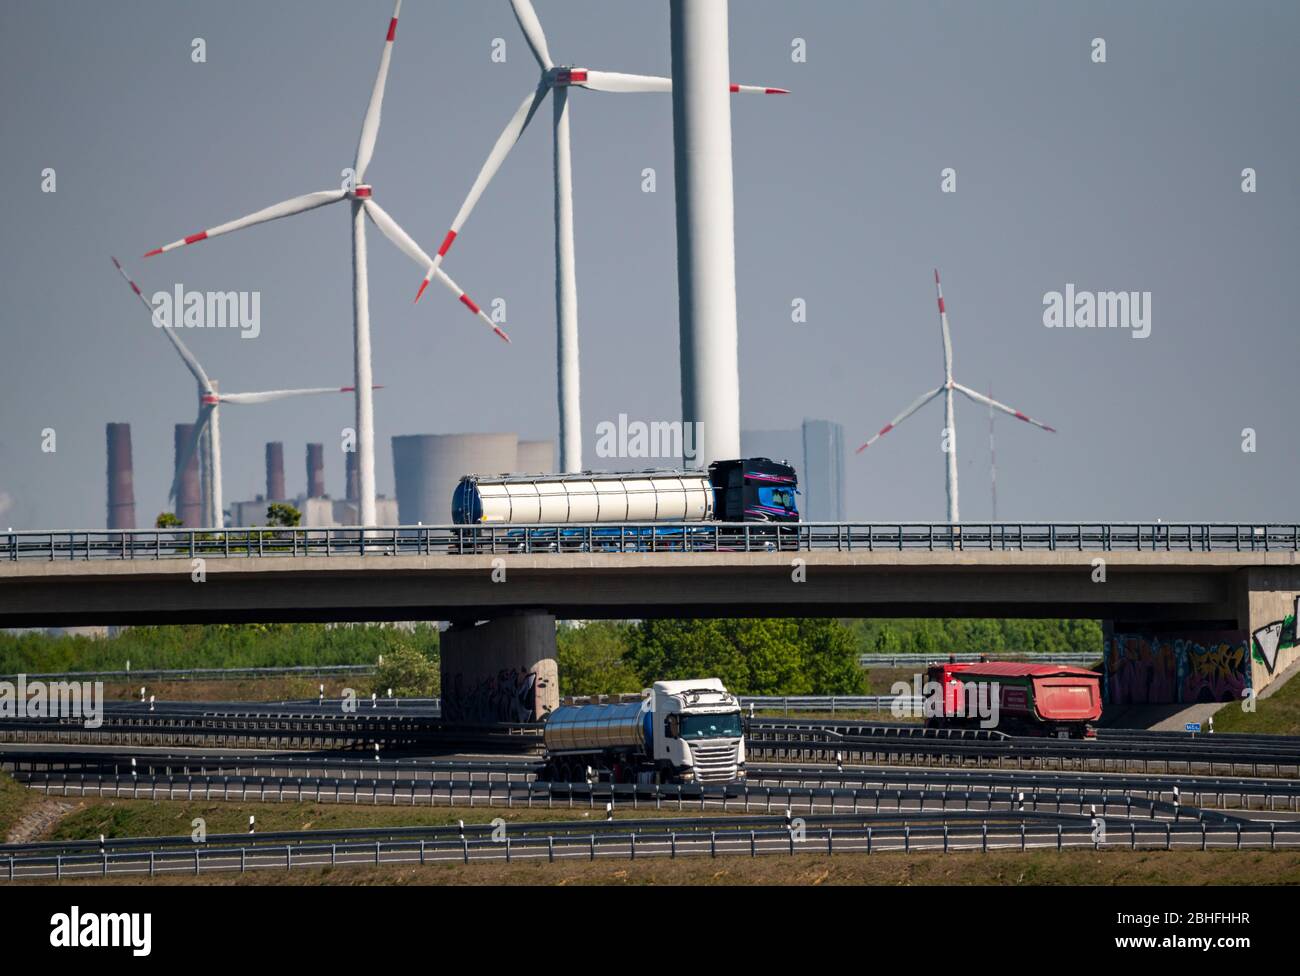 Jackerath motorway intersection, A44 and A61 motorways, in the Rhenish lignite mining area, wind farm, NRW, Germany, Stock Photo